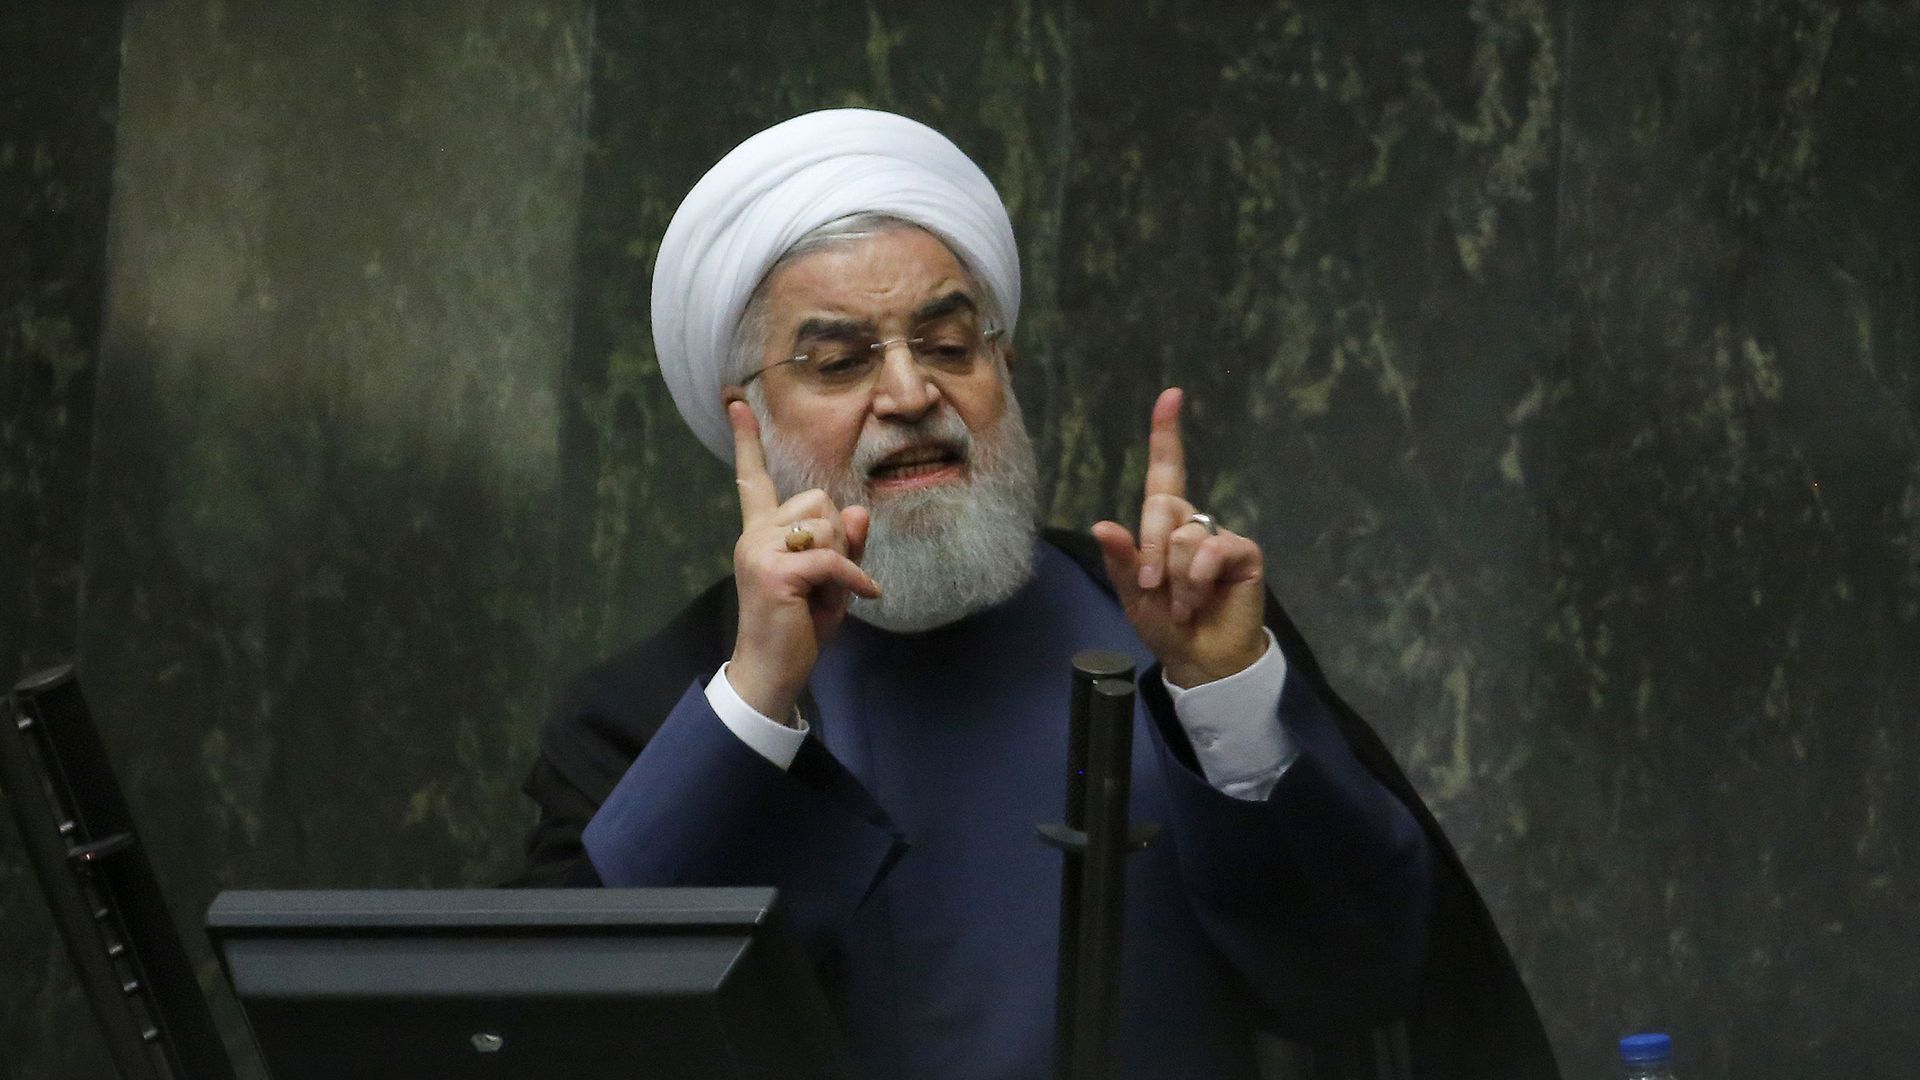 Iran's President Hassan Rouhani during a speech.